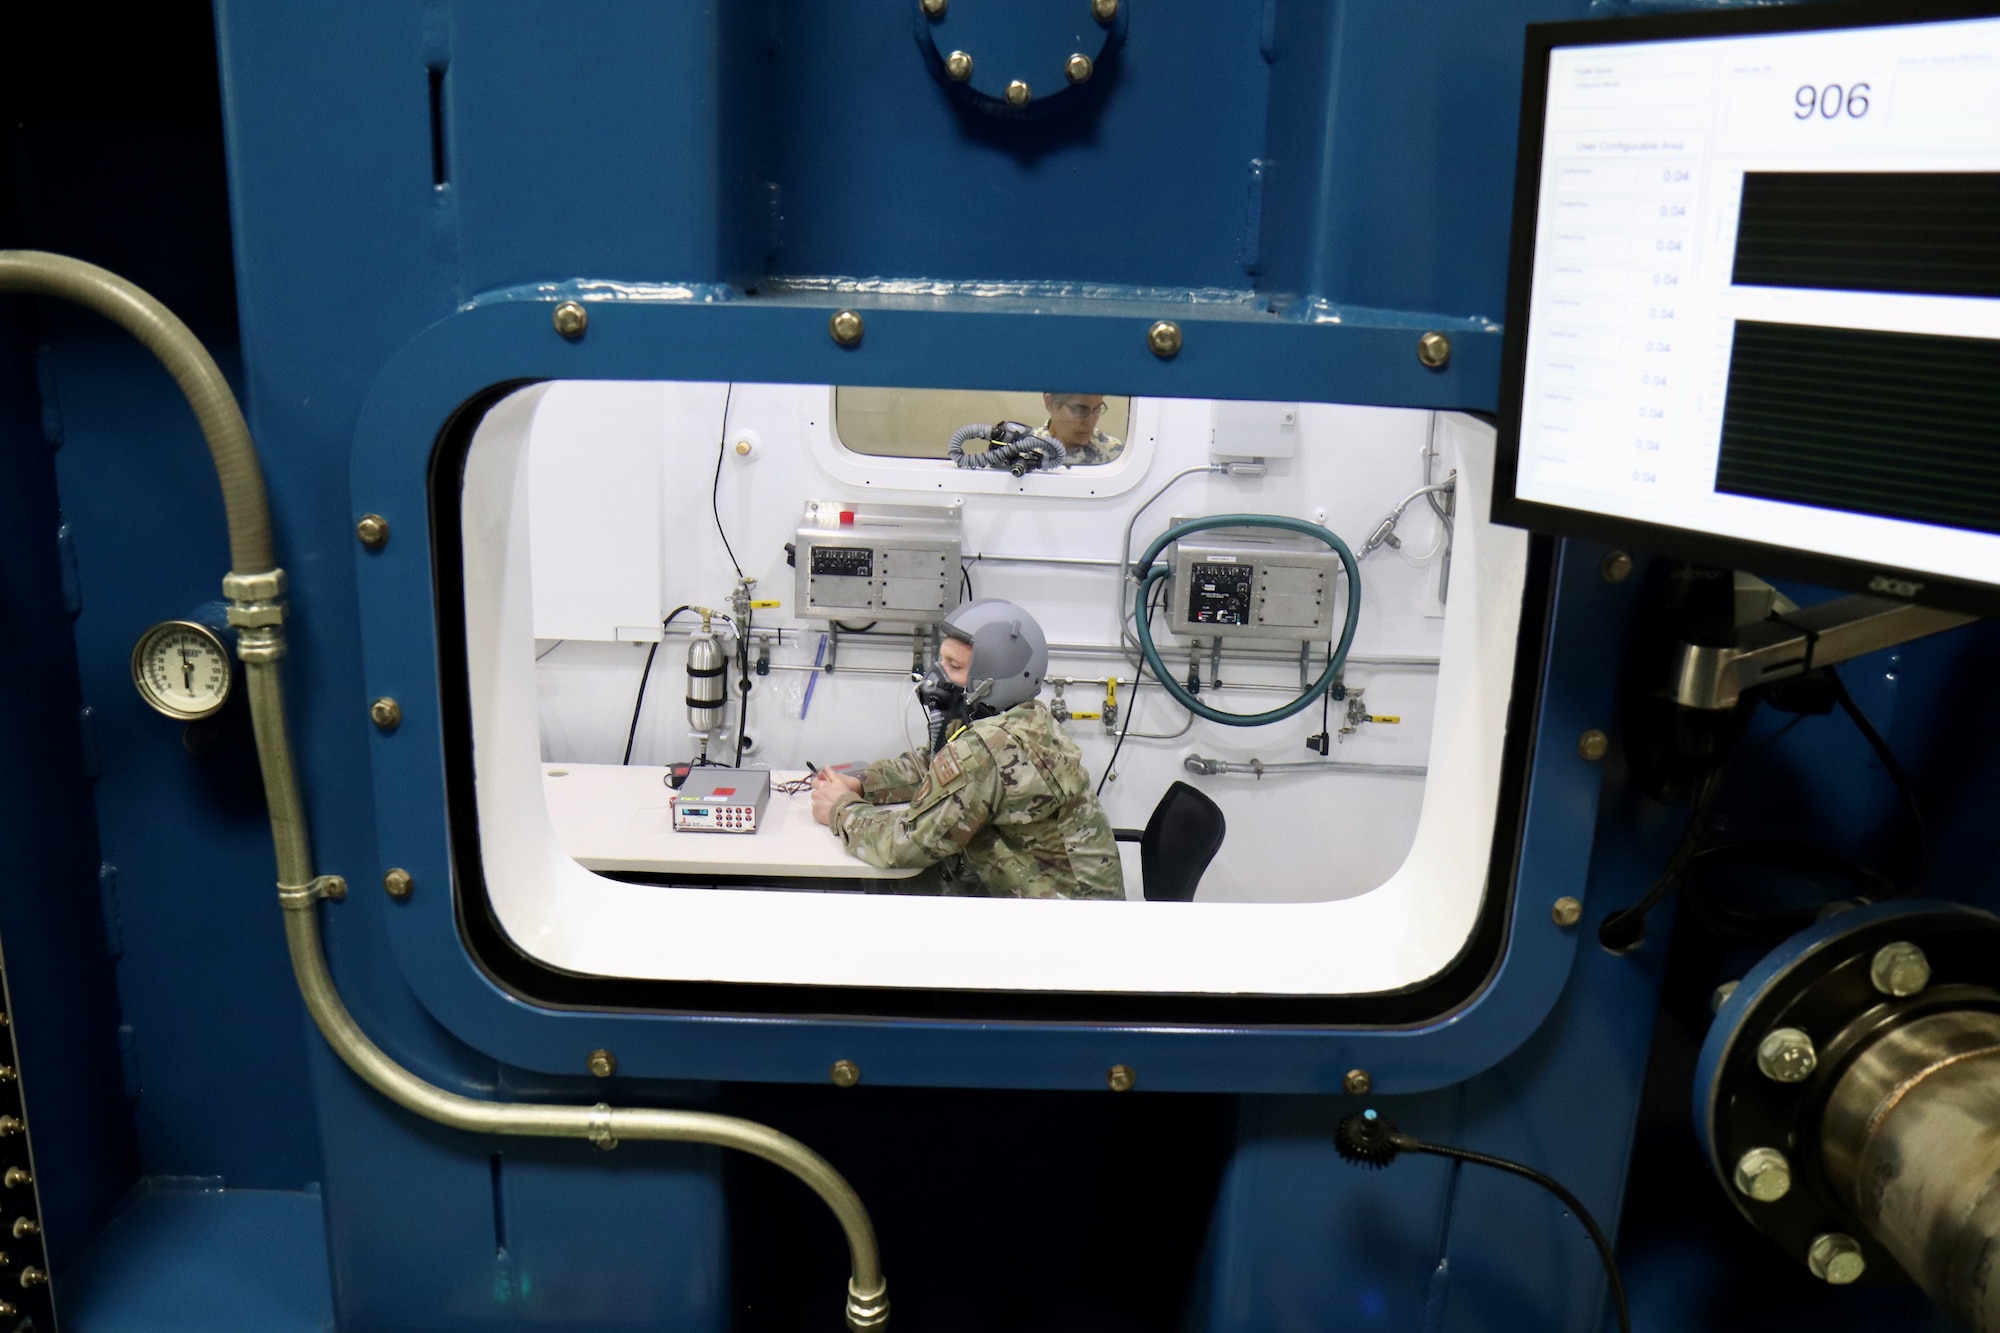 Tech. Sgt. Tyler Wineman sits inside a Research Altitude Chamber during an oxygen system test at Wright Patterson Air Force Base, Ohio, April 15, 2022. The chamber is one of three at the base that were certified in March for manned research up to 50,000 feet, a benchmark found nowhere else in the Department of Defense. Wineman is an aircrew flight equipment research technician assigned to the 711th Human Performance Wing, the Air Force Research Laboratory unit that operates the chambers. (U.S. Air Force photo/Jason Schaap)